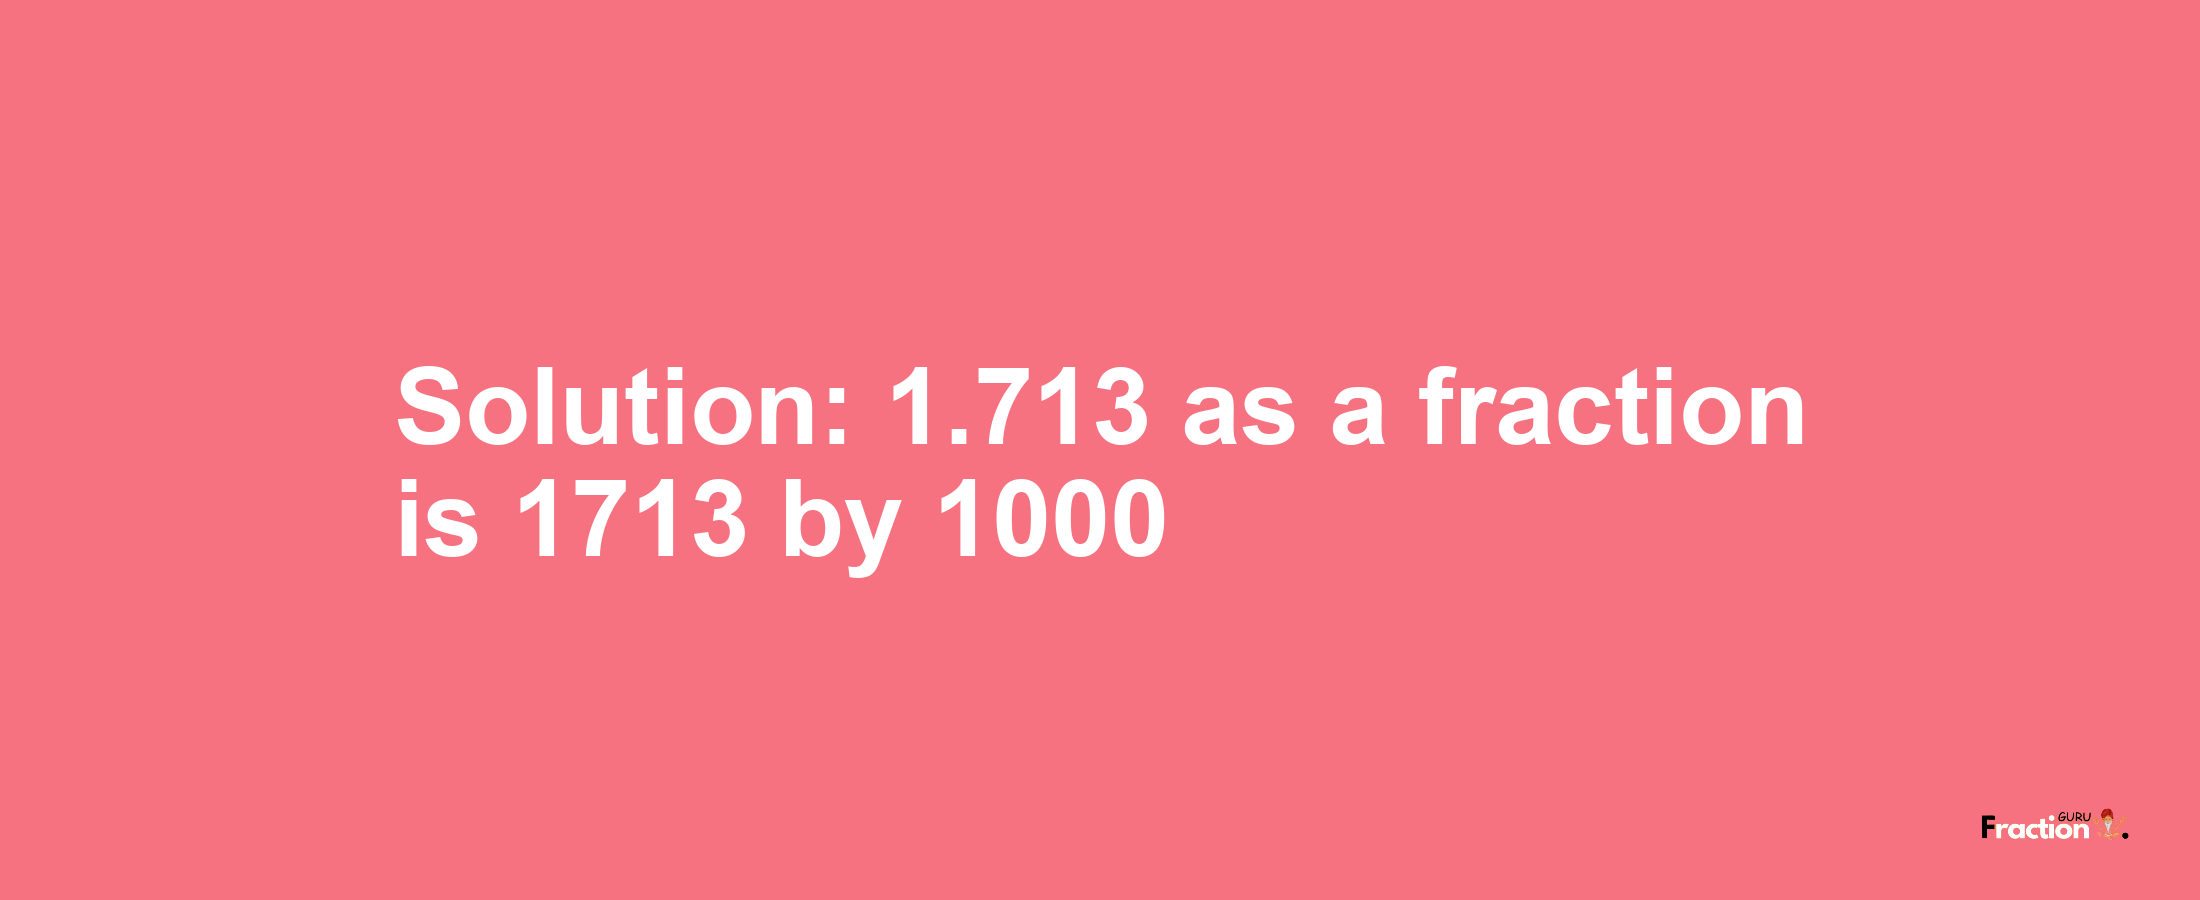 Solution:1.713 as a fraction is 1713/1000